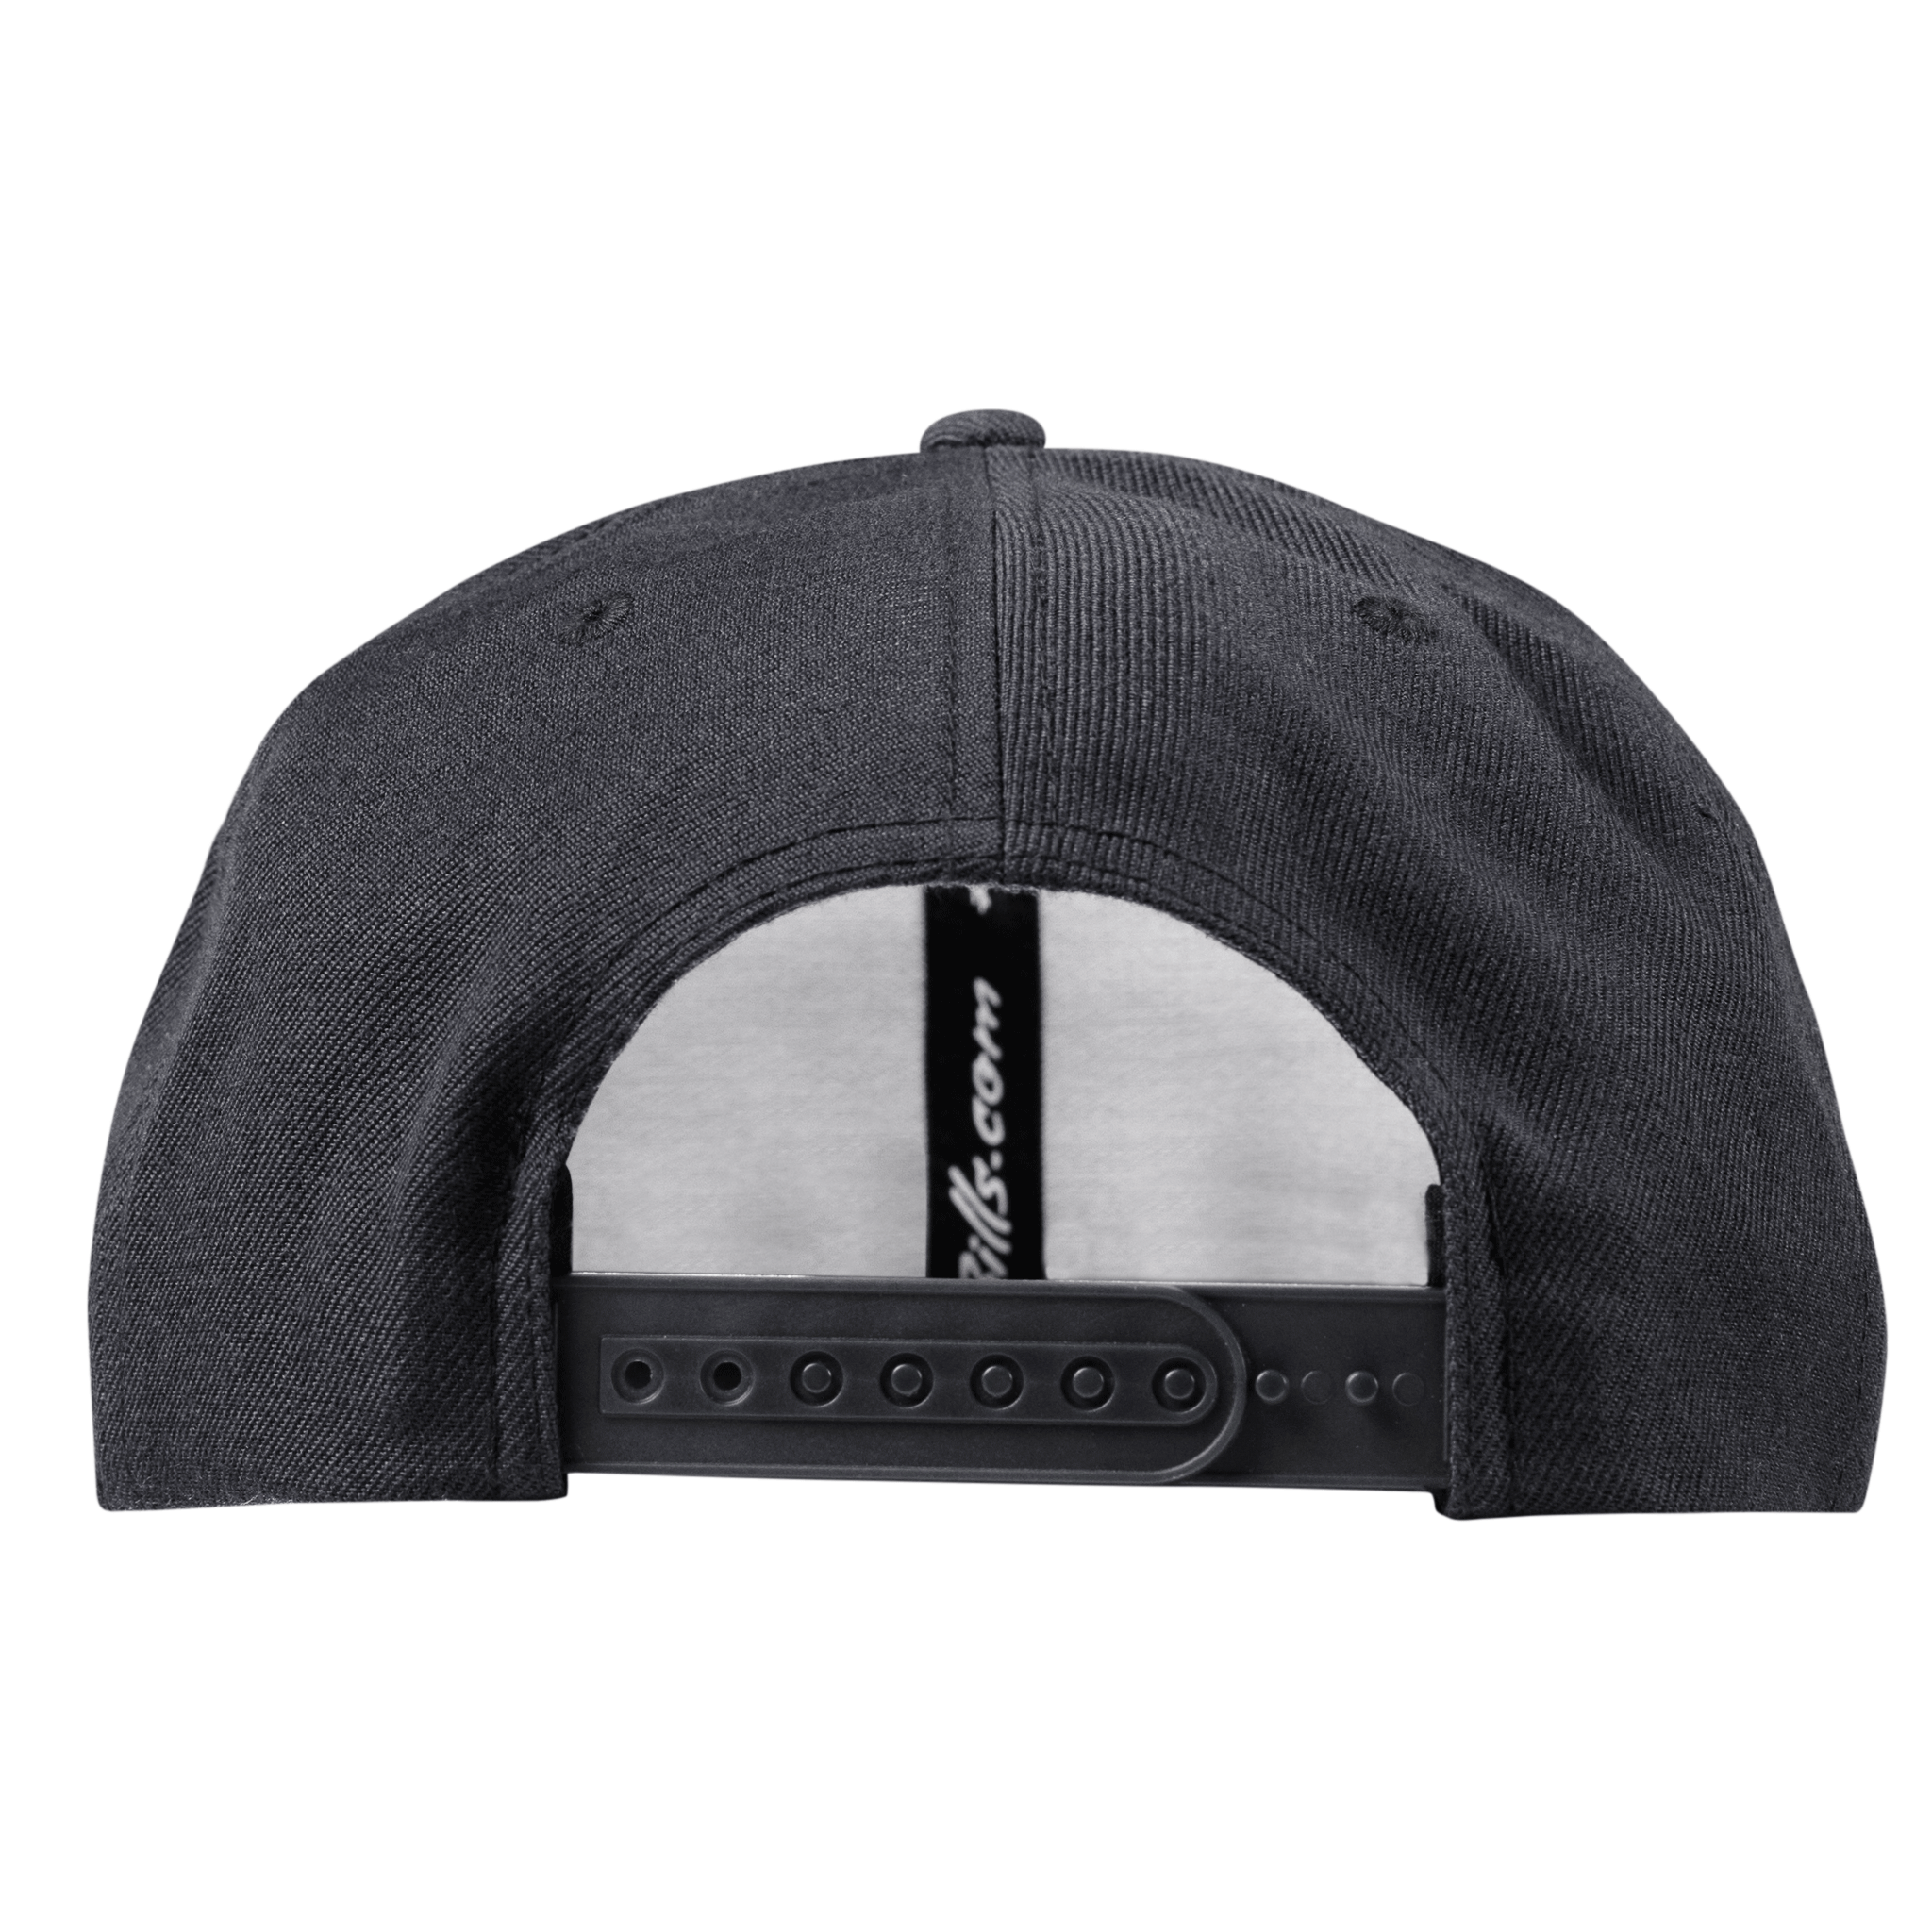 Old Glory Midnight Classic Snapback Back Charcoal